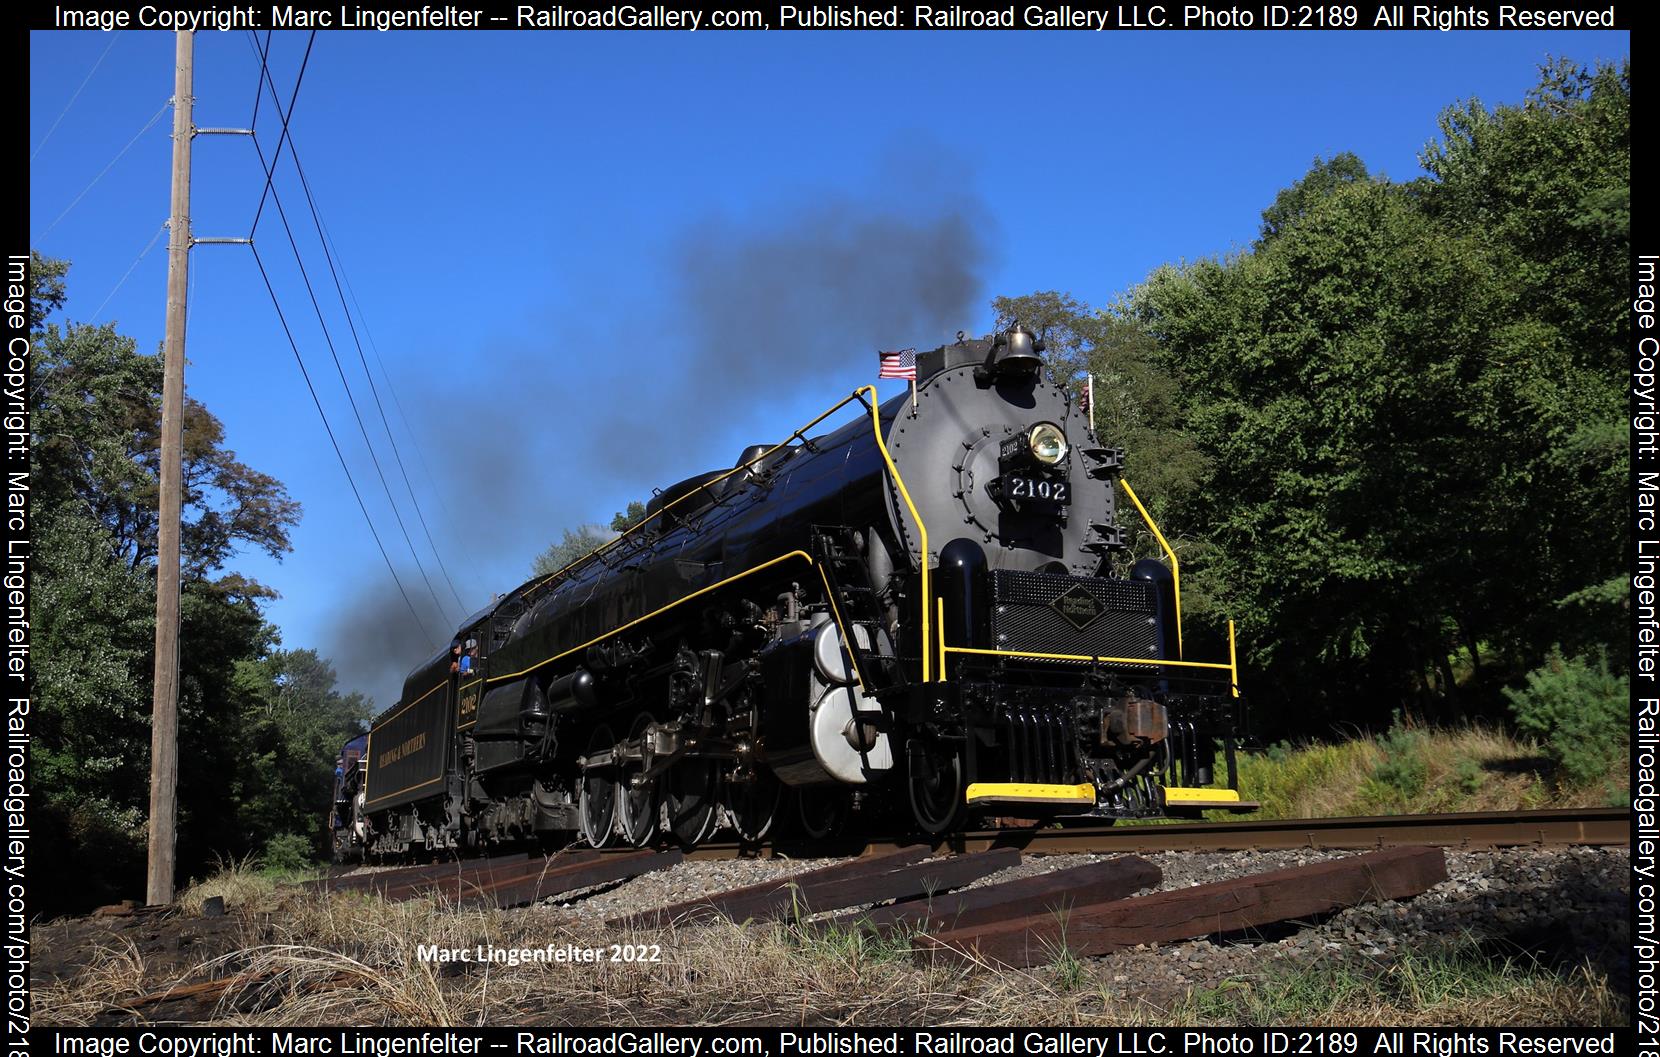 R&N 2102 is a class Steam 4-8-4 and  is pictured in Atlas, Pennsylvania, USA.  This was taken along the Reading and Northern mainline on the Reading Blue Mountain and Northern Railroad. Photo Copyright: Marc Lingenfelter uploaded to Railroad Gallery on 07/03/2023. This photograph of R&N 2102 was taken on Saturday, August 13, 2022. All Rights Reserved. 